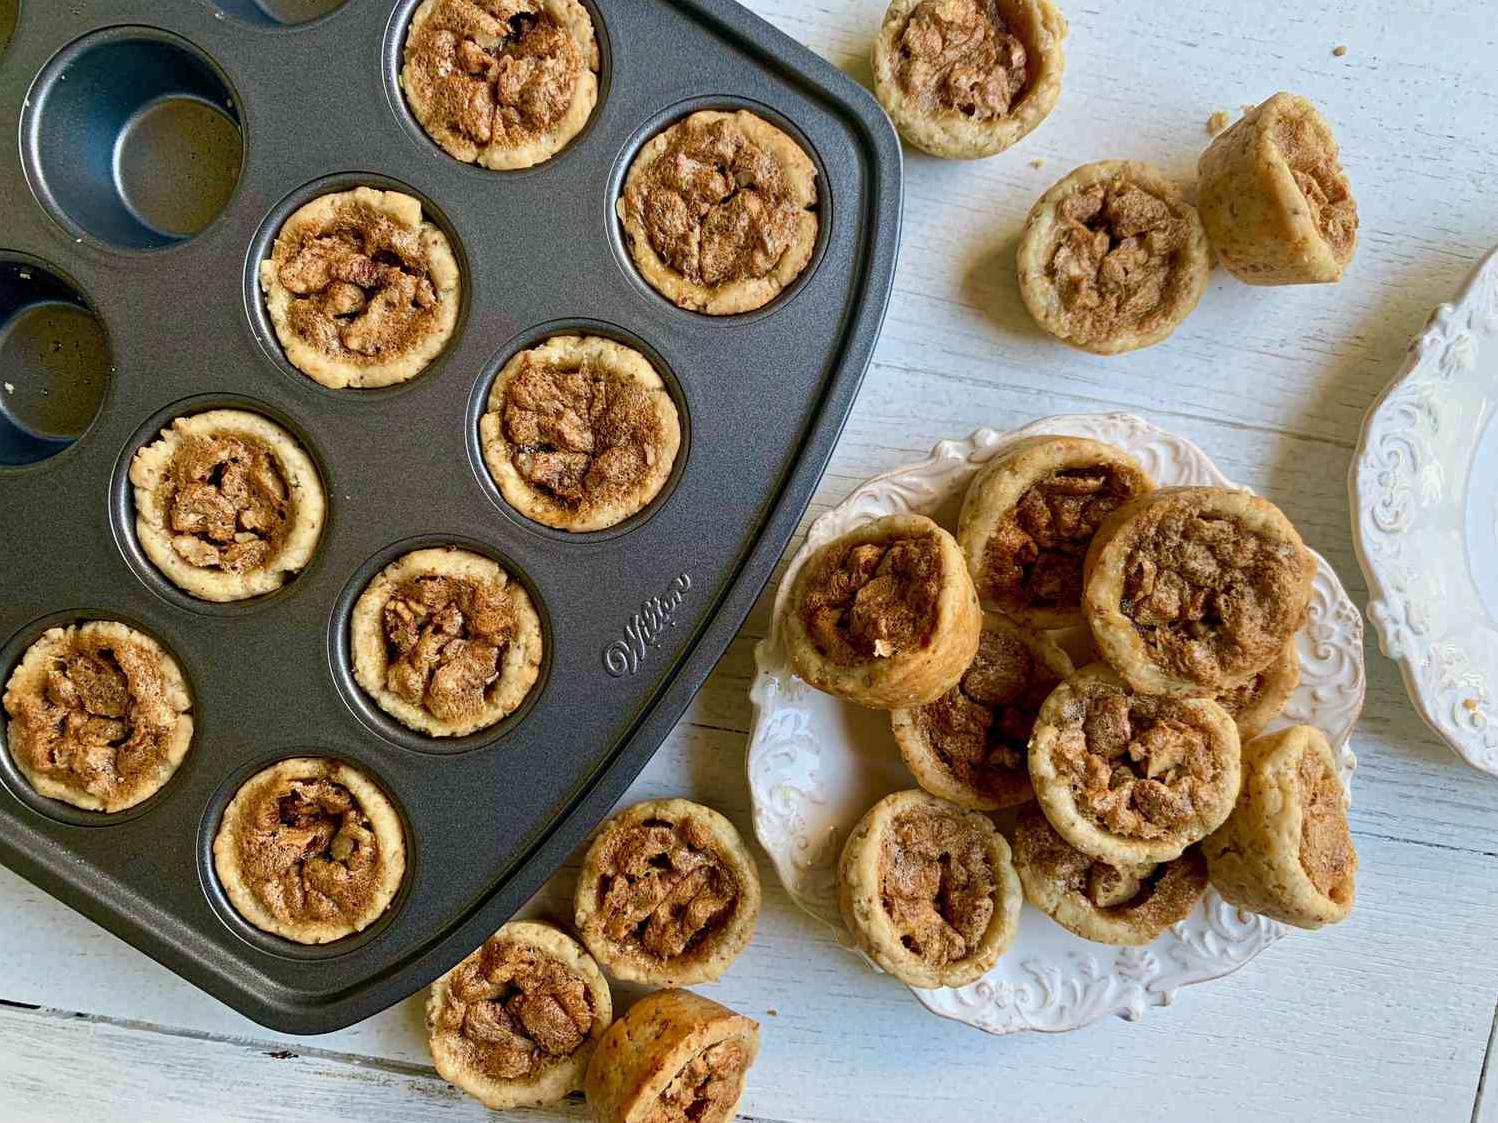  The Perfect Hand-Held Treat: Southern Pecan Pie Tarts